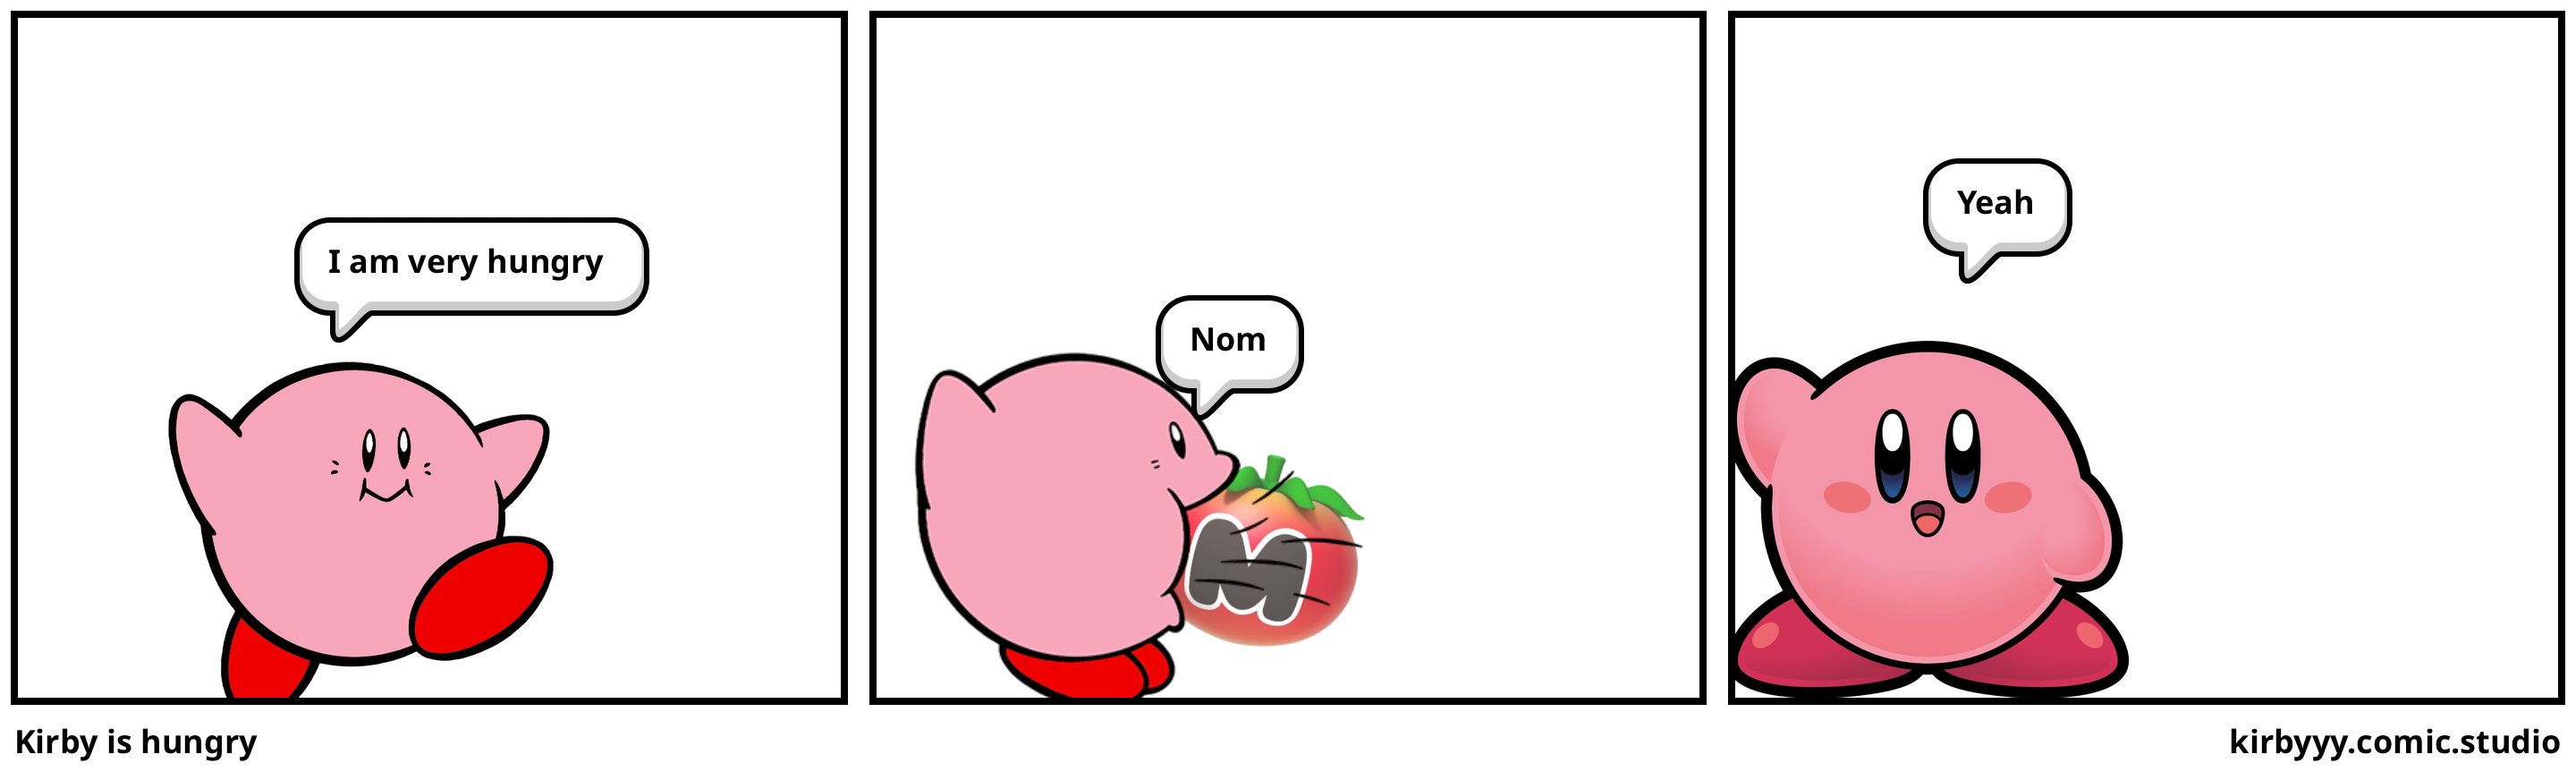 Kirby is hungry